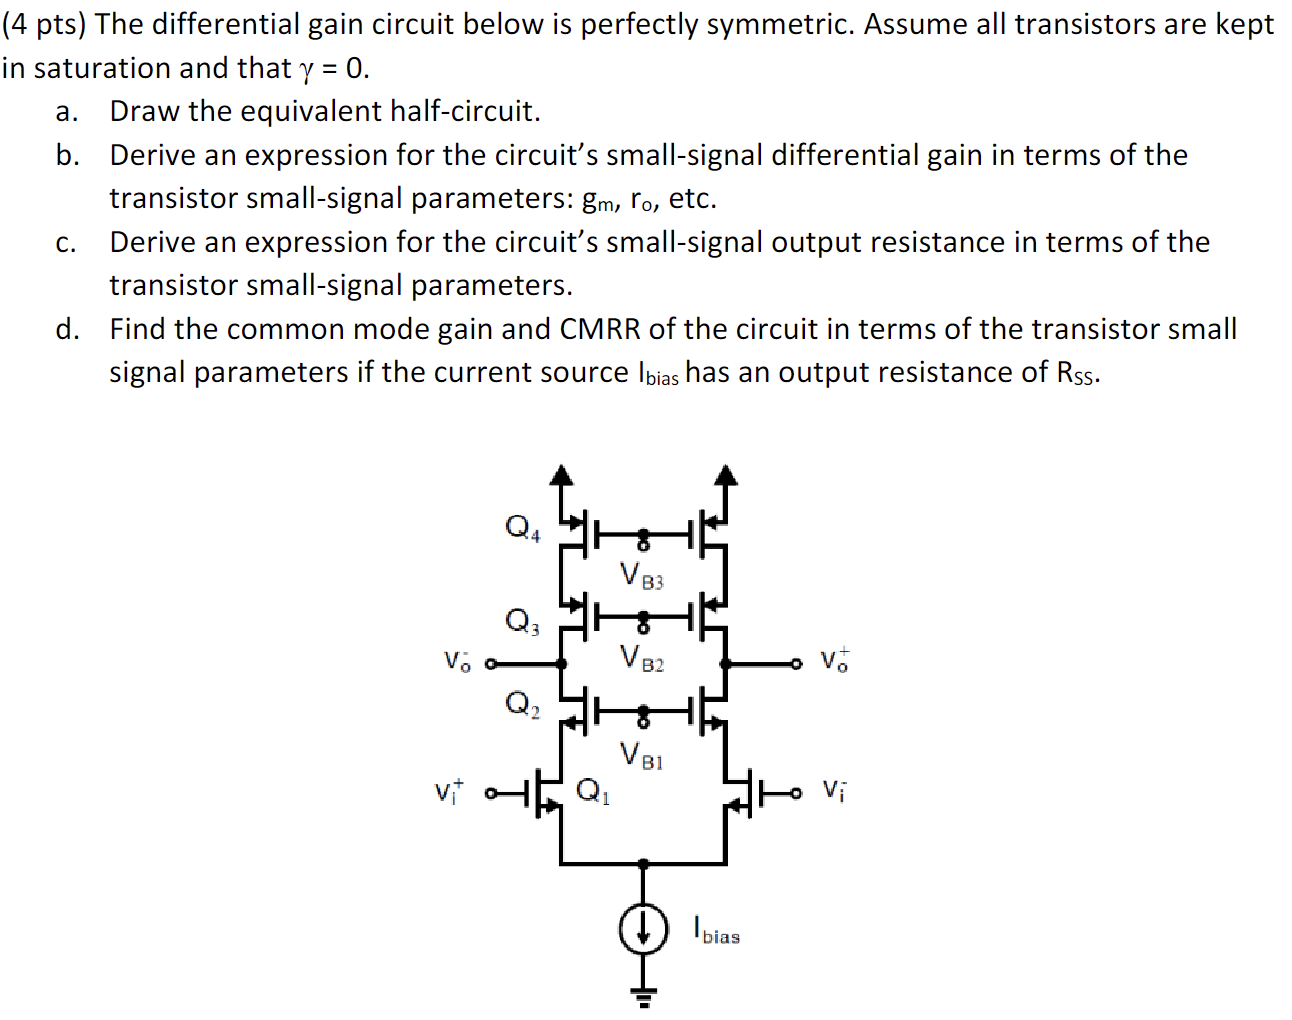 The differential gain circuit below is perfectly symmetric. Assume all transistors are kep n saturation and that γ = 0. a. Draw the equivalent half-circuit. b. Derive an expression for the circuit's small-signal differential gain in terms of the transistor small-signal parameters: gm, ro, etc. c. Derive an expression for the circuit's small-signal output resistance in terms of the transistor small-signal parameters. d. Find the common mode gain and CMRR of the circuit in terms of the transistor small signal parameters if the current source Ibias  has an output resistance of Rss.